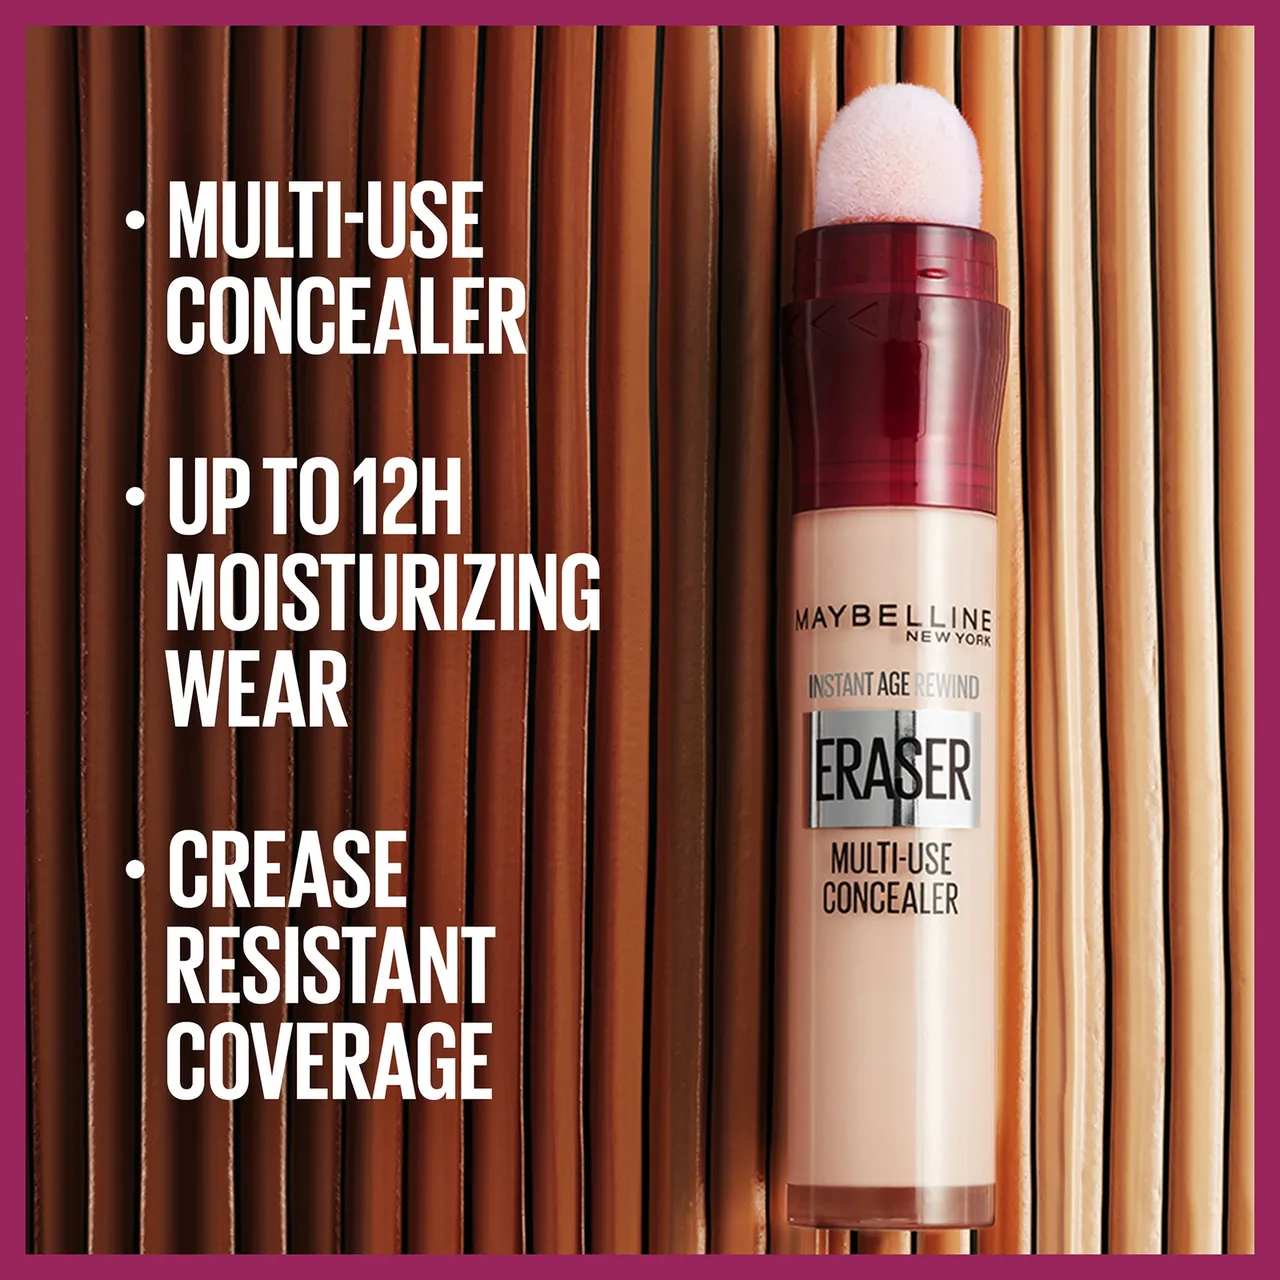 Maybelline Instant Anti Age Eraser Concealer 6.8ml (Various Shades) - 02 Nude